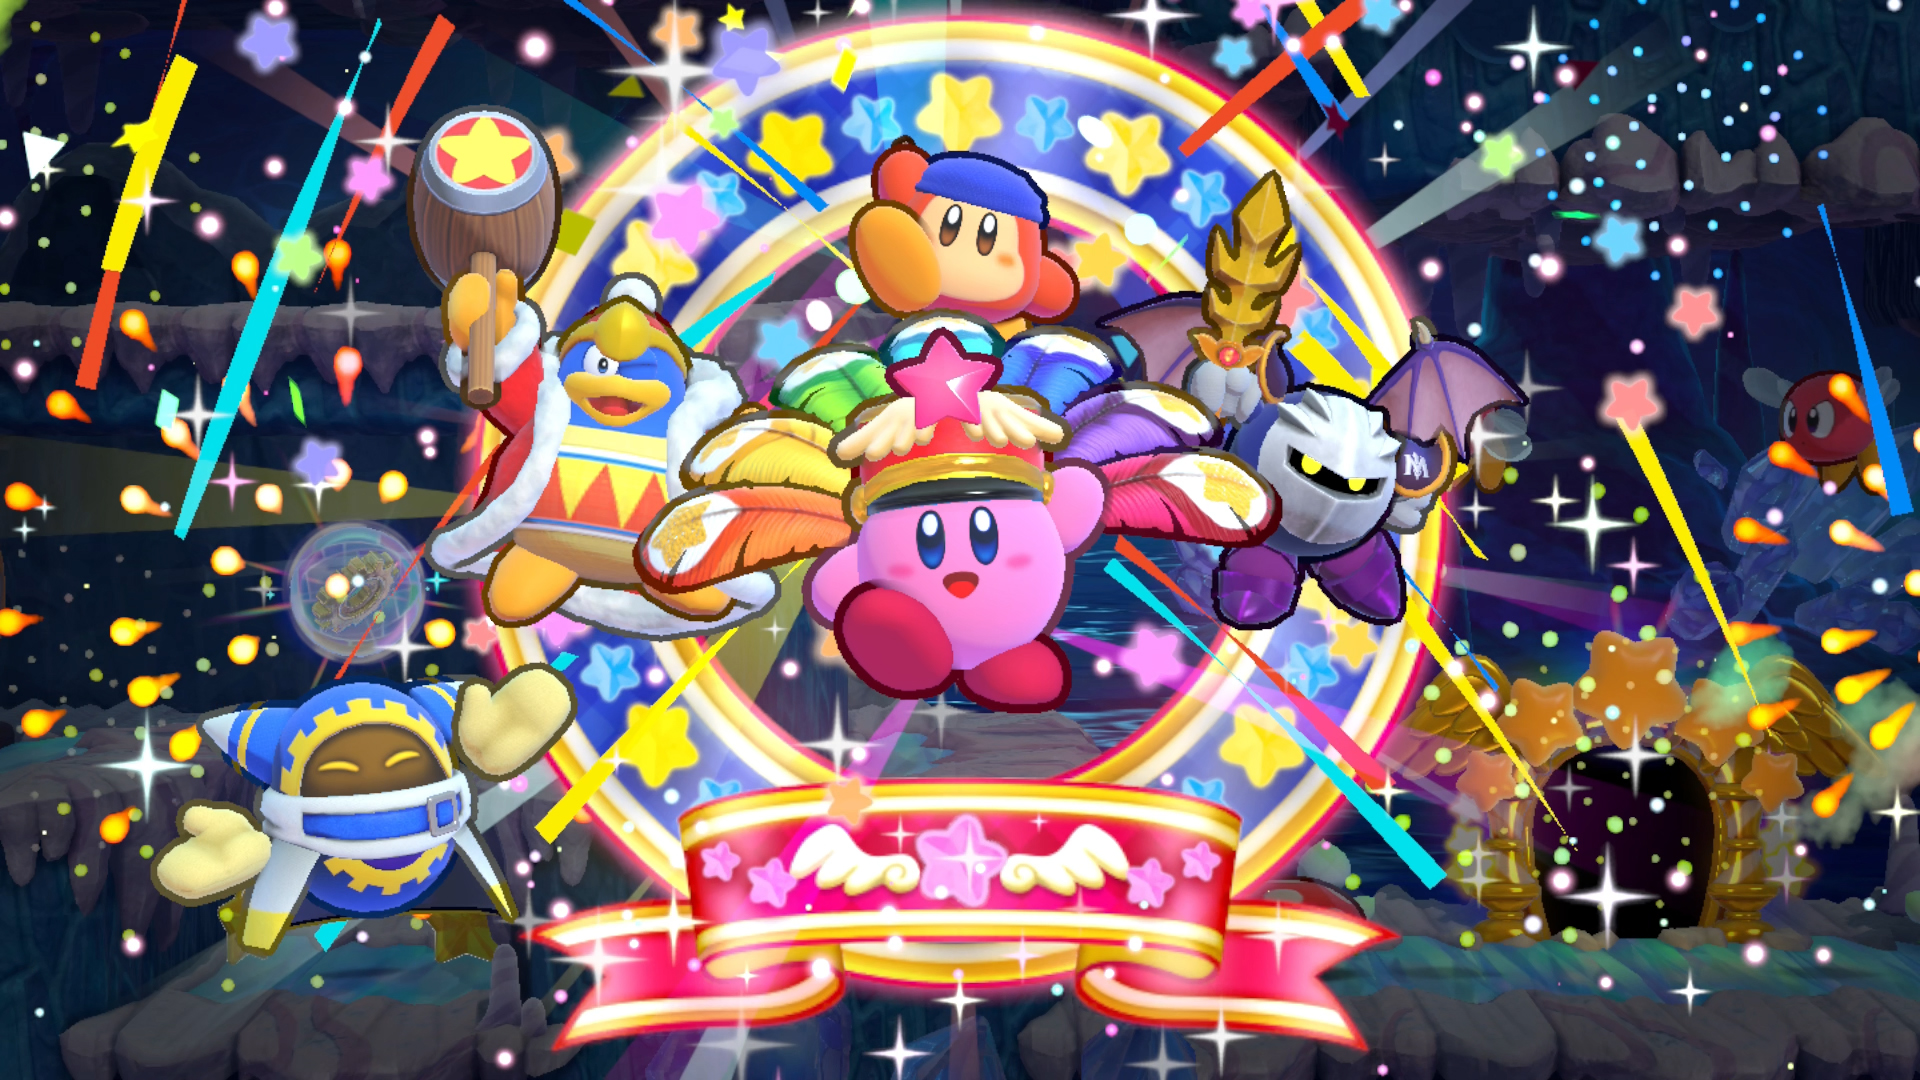 Kirby's Return to Dream Land Deluxe official Japanese website now open